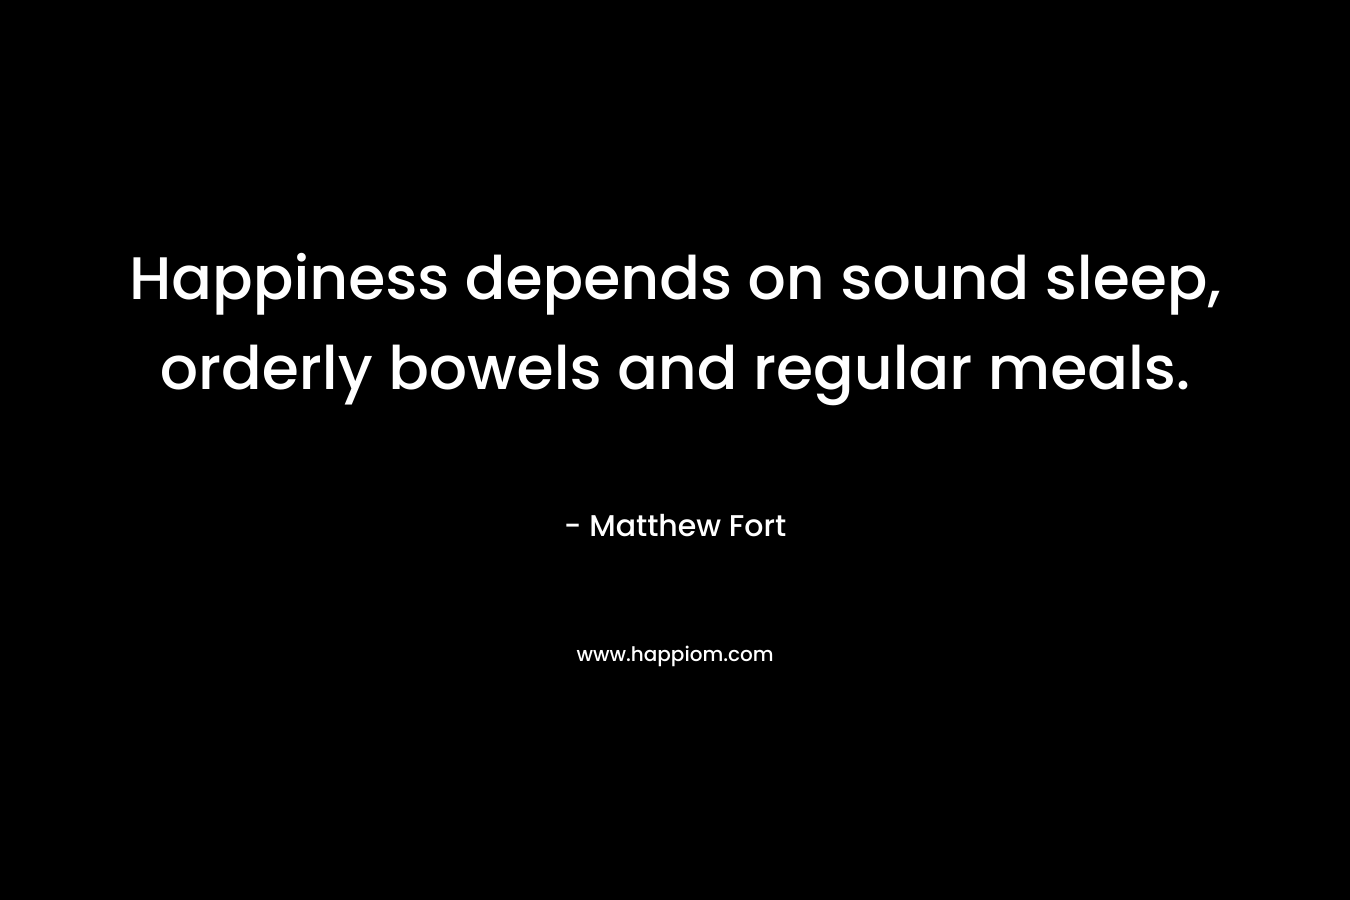 Happiness depends on sound sleep, orderly bowels and regular meals. – Matthew Fort